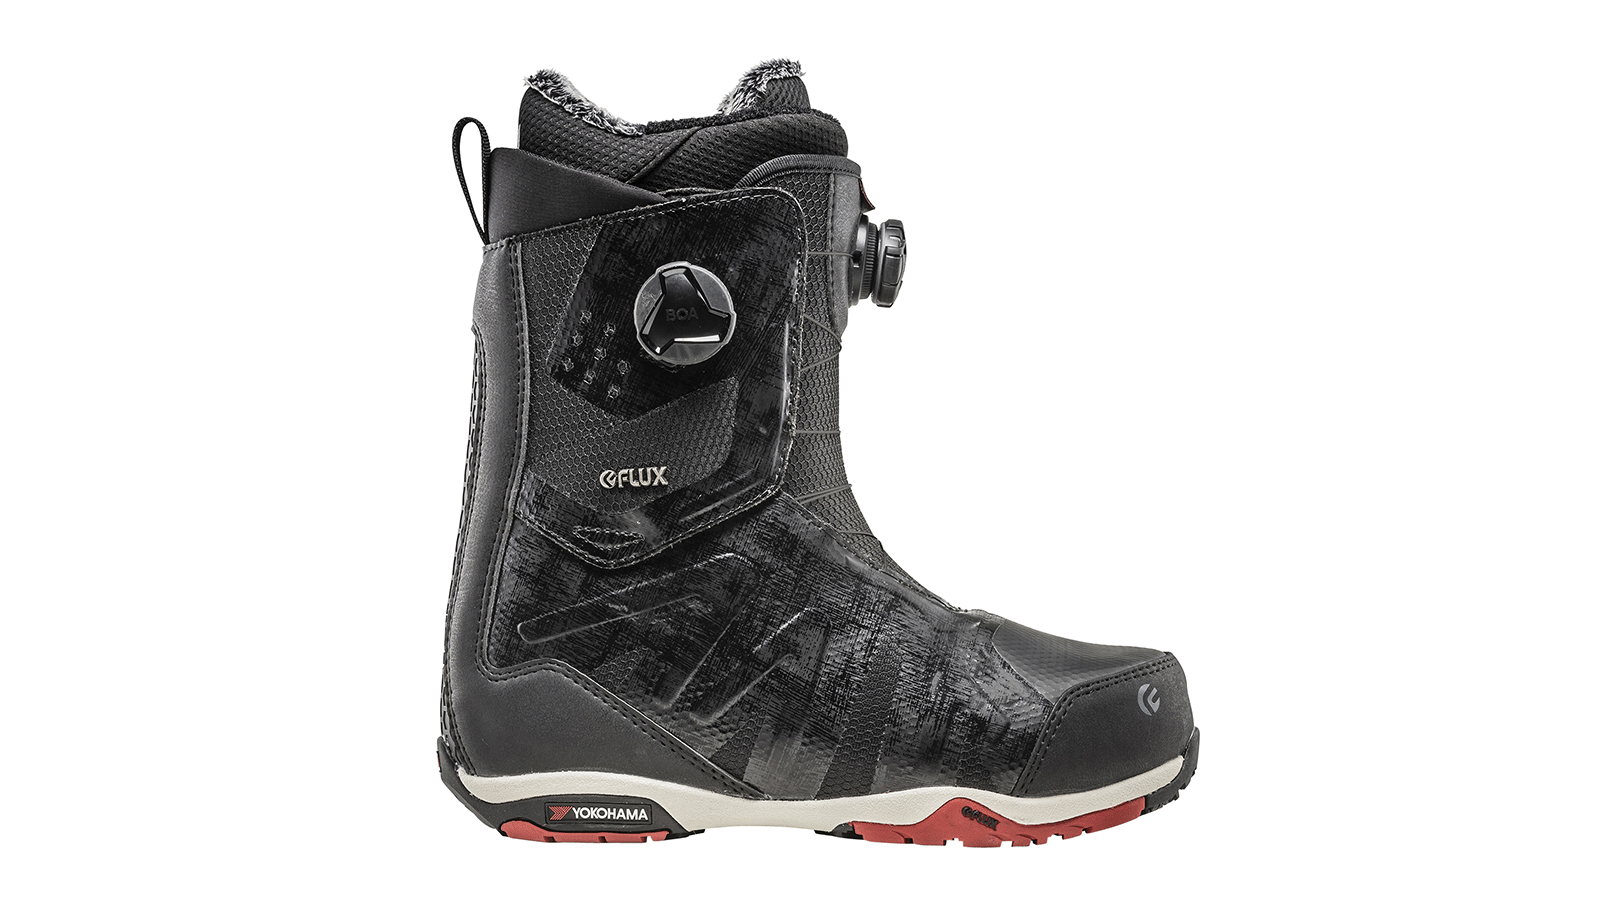 Flux FW19/20 Snowboard Boots Preview - Boardsport SOURCE